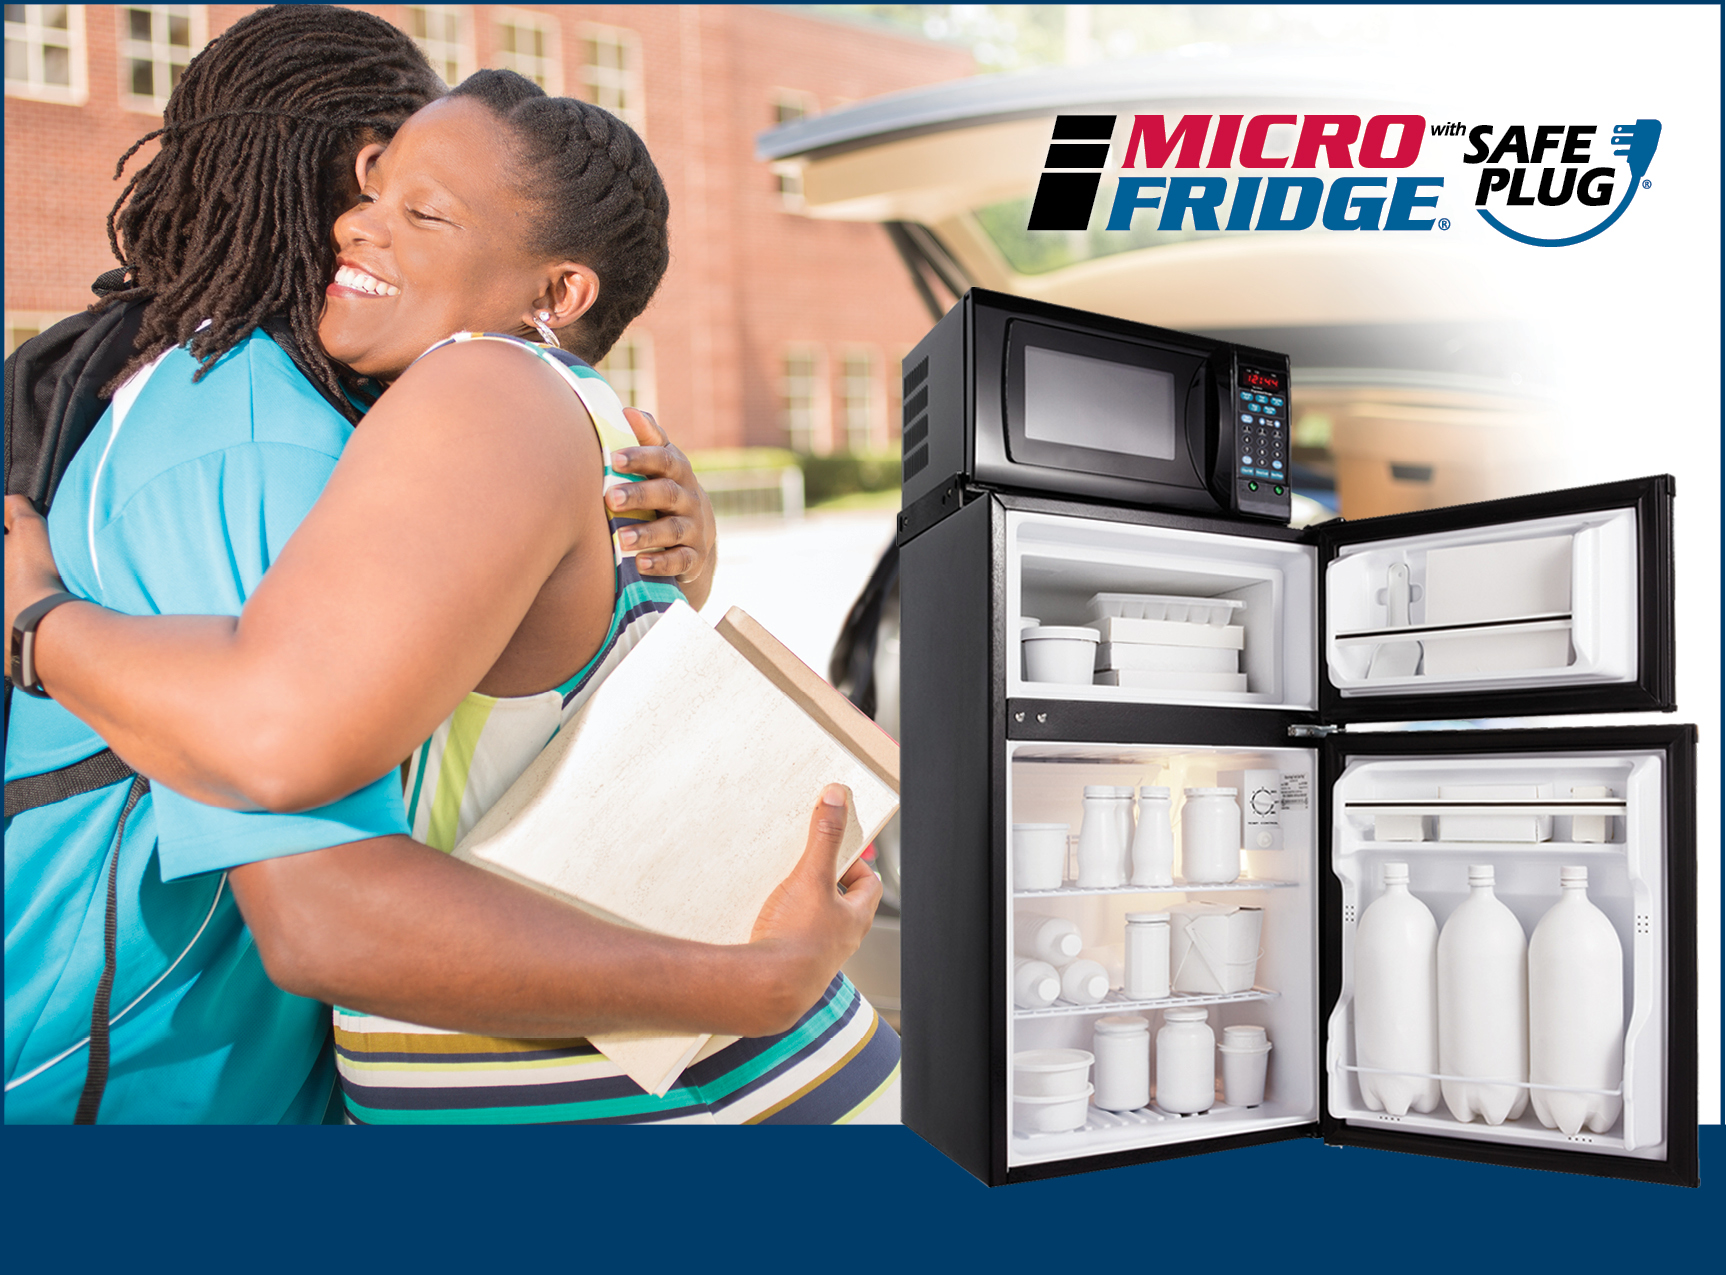 Photo of mother and daughter hugging and a microfridge